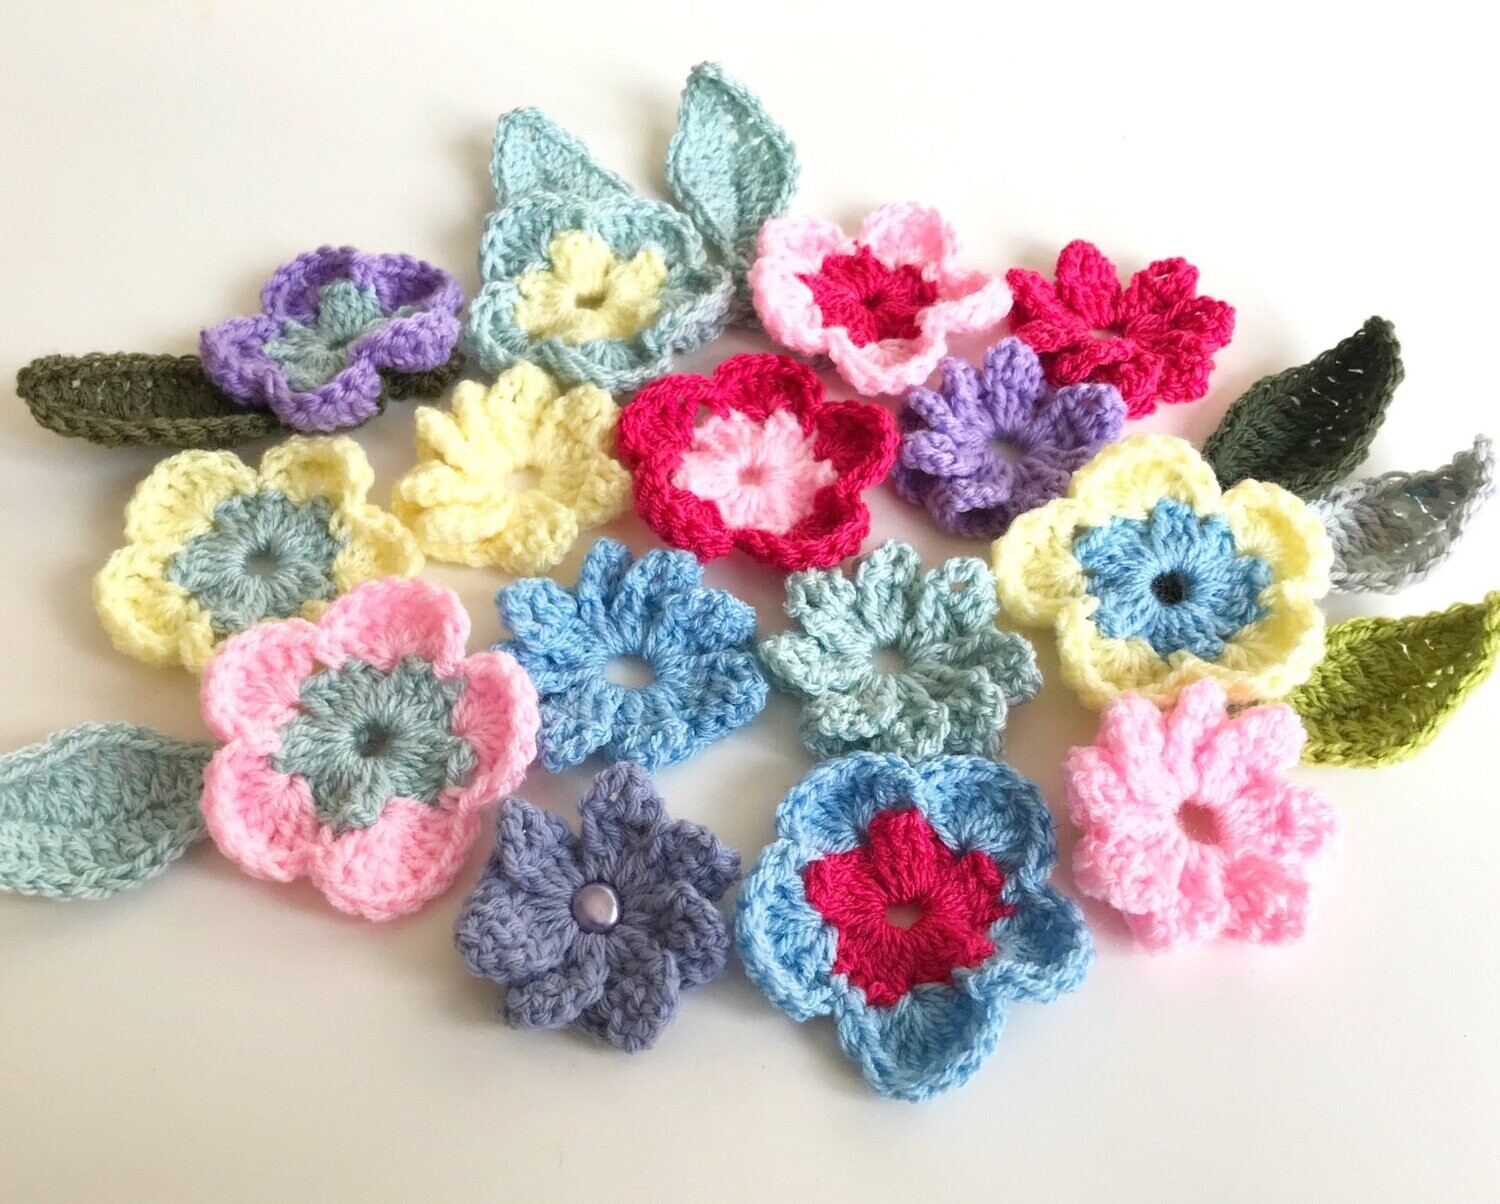 Crochet Flowers and Leaves, Saturday 11th December 10.30-13.00pm